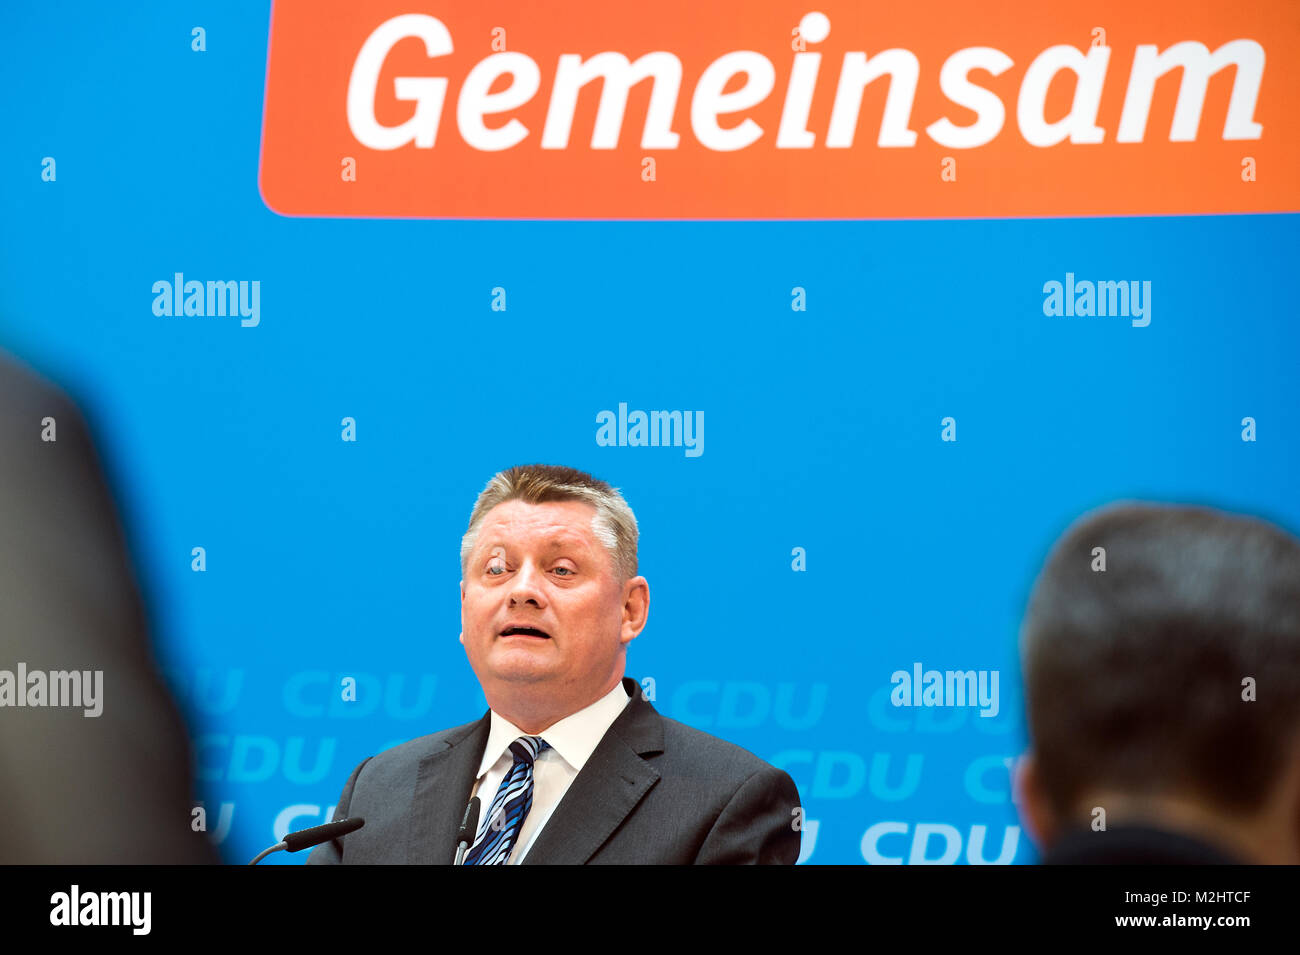 The chairman of the CDU Hermann Gröhe gives a press conference after a CDU federal meeting with Angela Merkel. Stock Photo